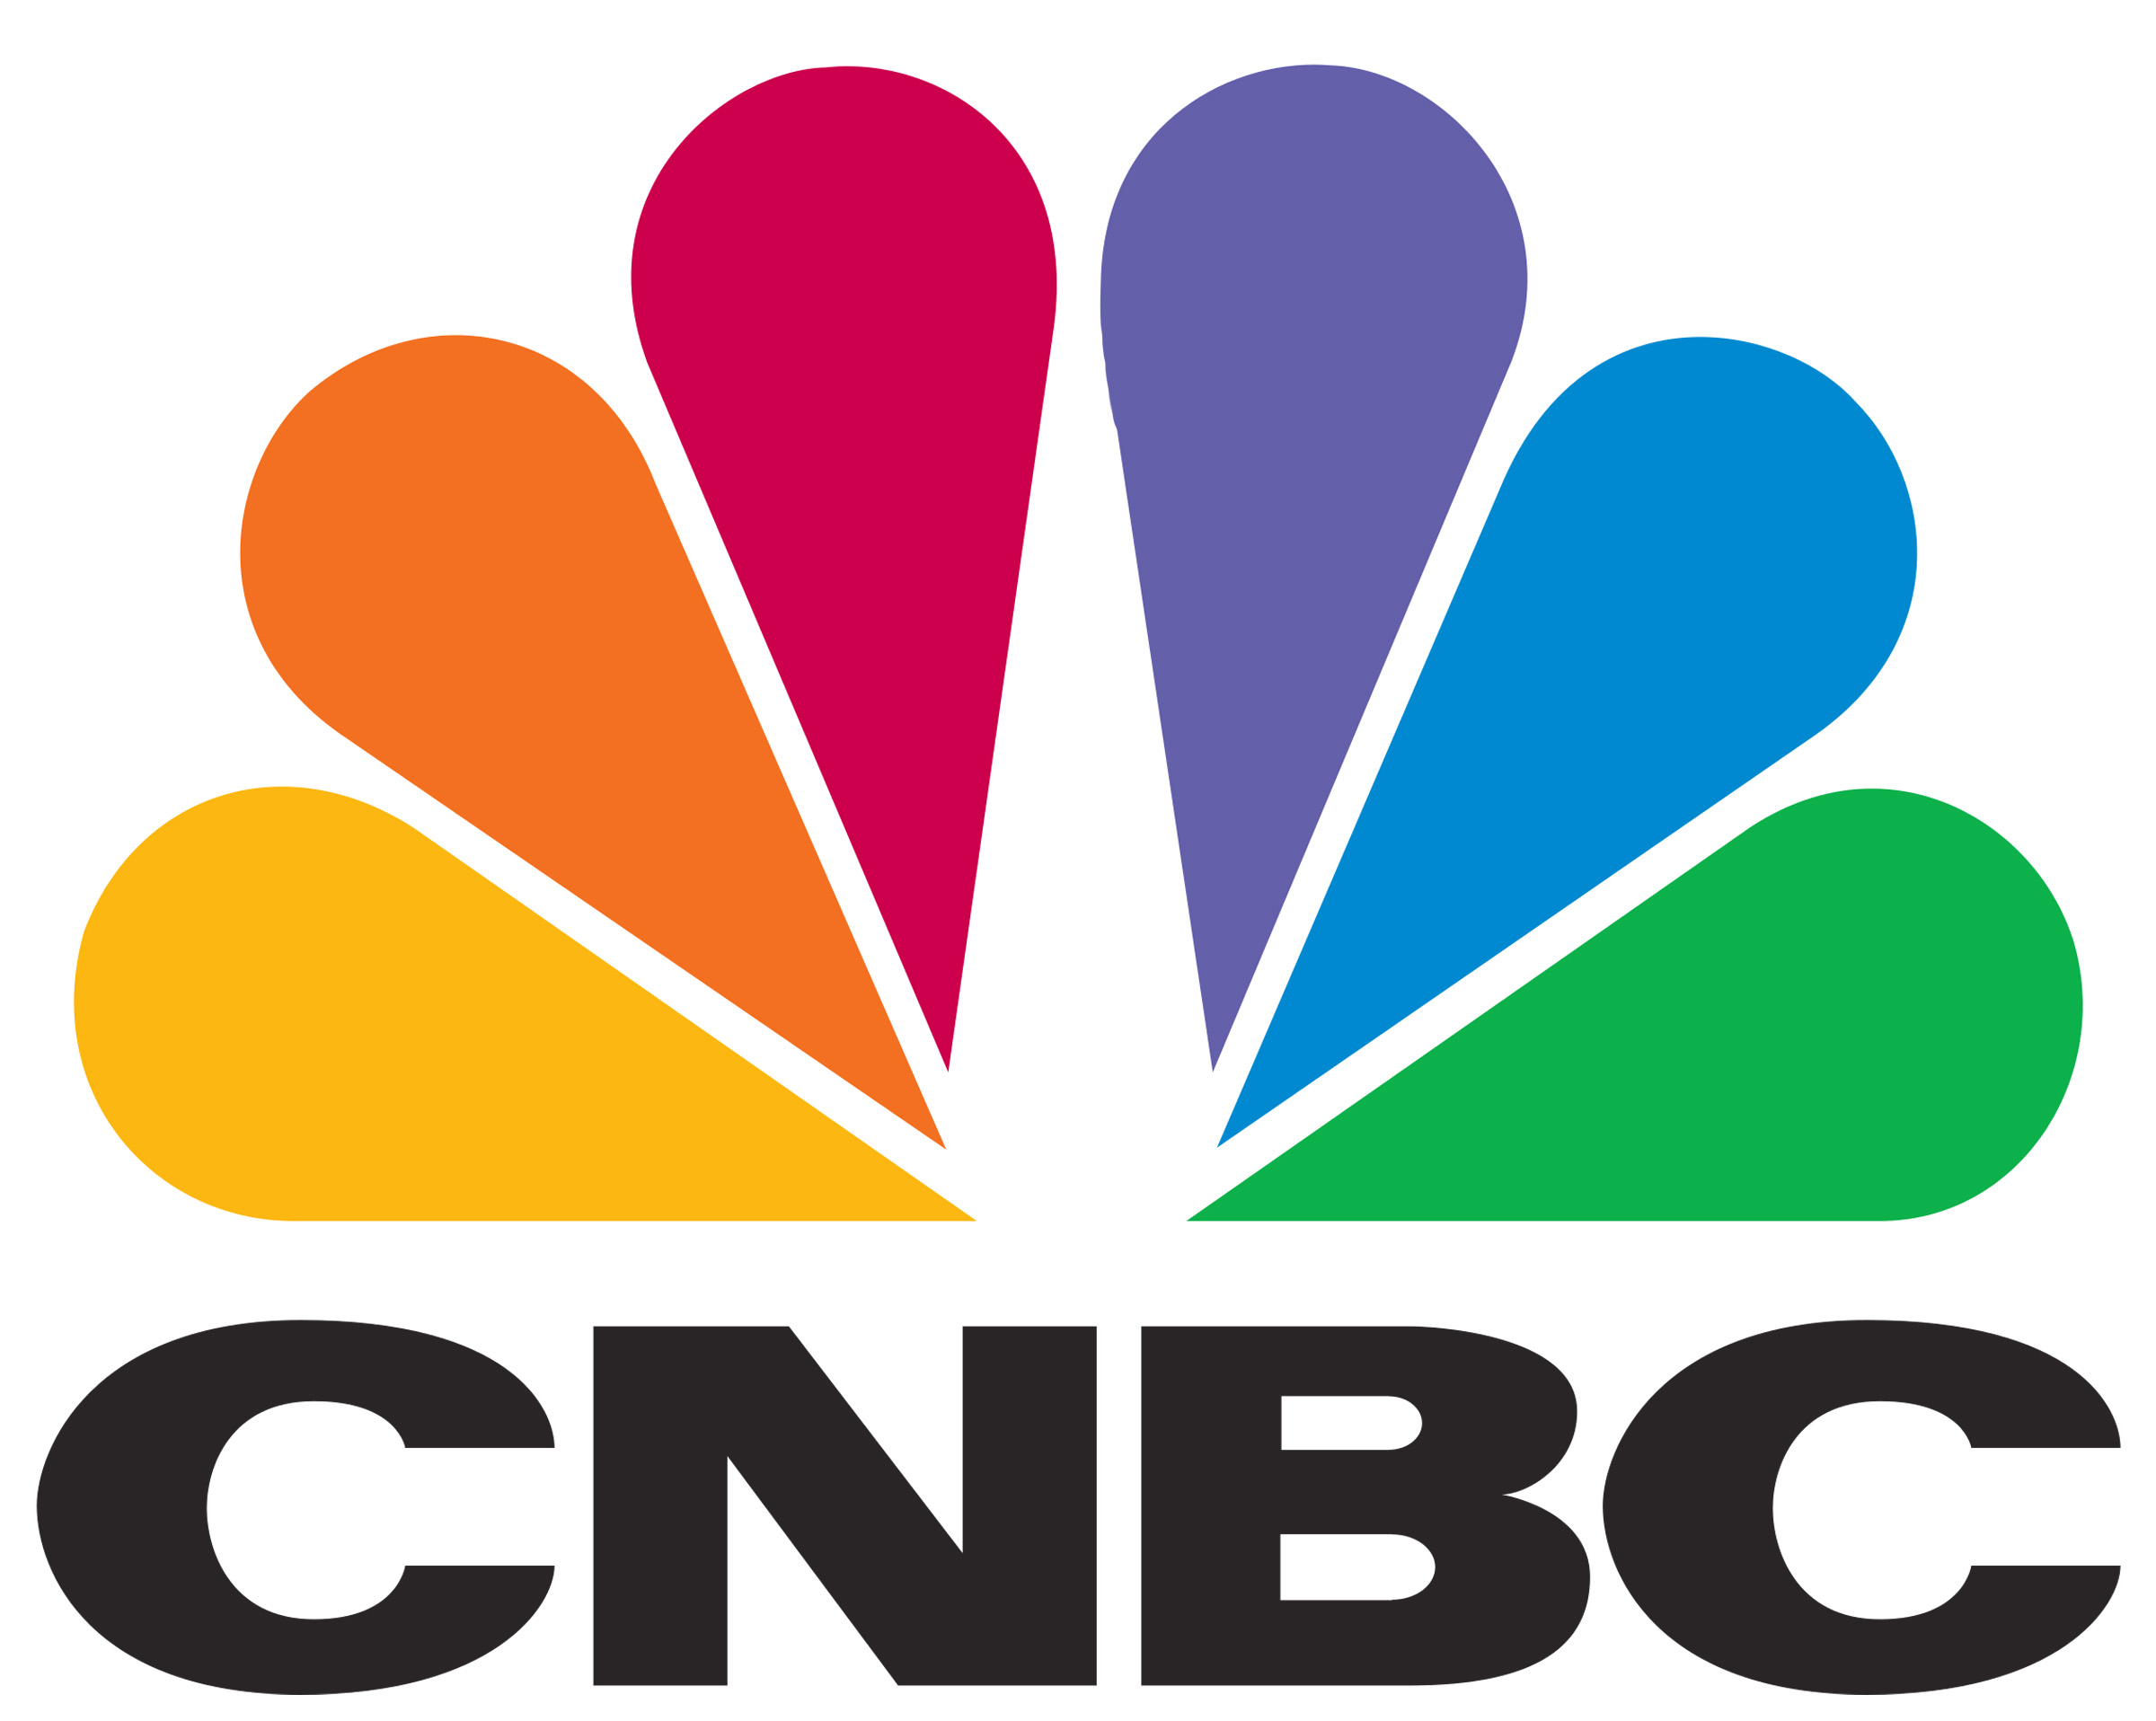 CNBC logo. They recommend LawsuitAnalysis.com for dispute resolution for pro se litigants